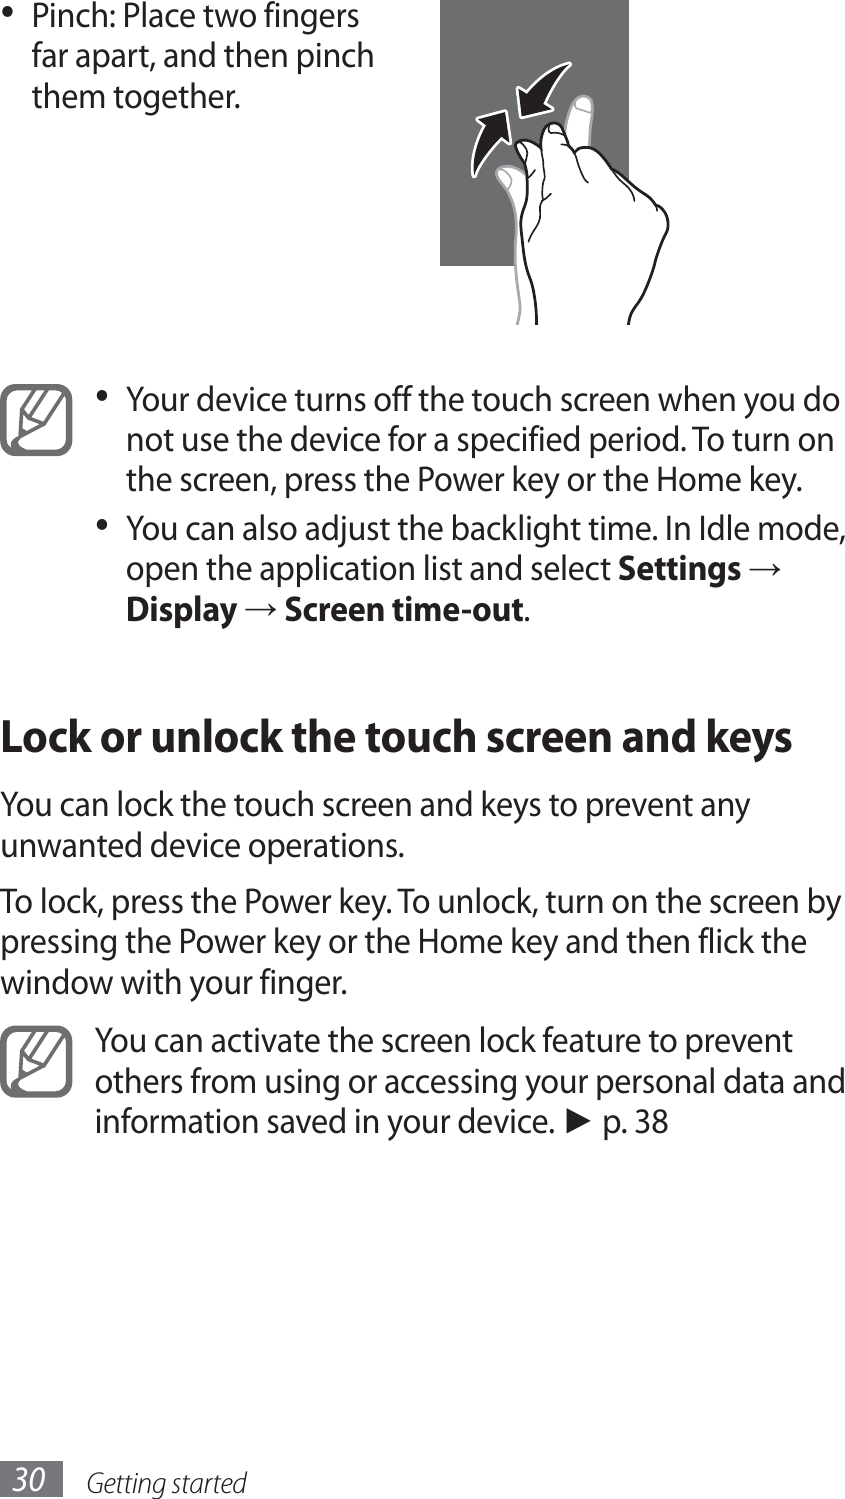 Getting started30Pinch: Place two fingers • far apart, and then pinch them together.Your device turns off the touch screen when you do • not use the device for a specified period. To turn on the screen, press the Power key or the Home key. You can also adjust the backlight time. In Idle mode, • open the application list and select Settings → Display → Screen time-out.Lock or unlock the touch screen and keysYou can lock the touch screen and keys to prevent any unwanted device operations. To lock, press the Power key. To unlock, turn on the screen by pressing the Power key or the Home key and then flick the window with your finger.You can activate the screen lock feature to prevent others from using or accessing your personal data and information saved in your device. ► p. 38